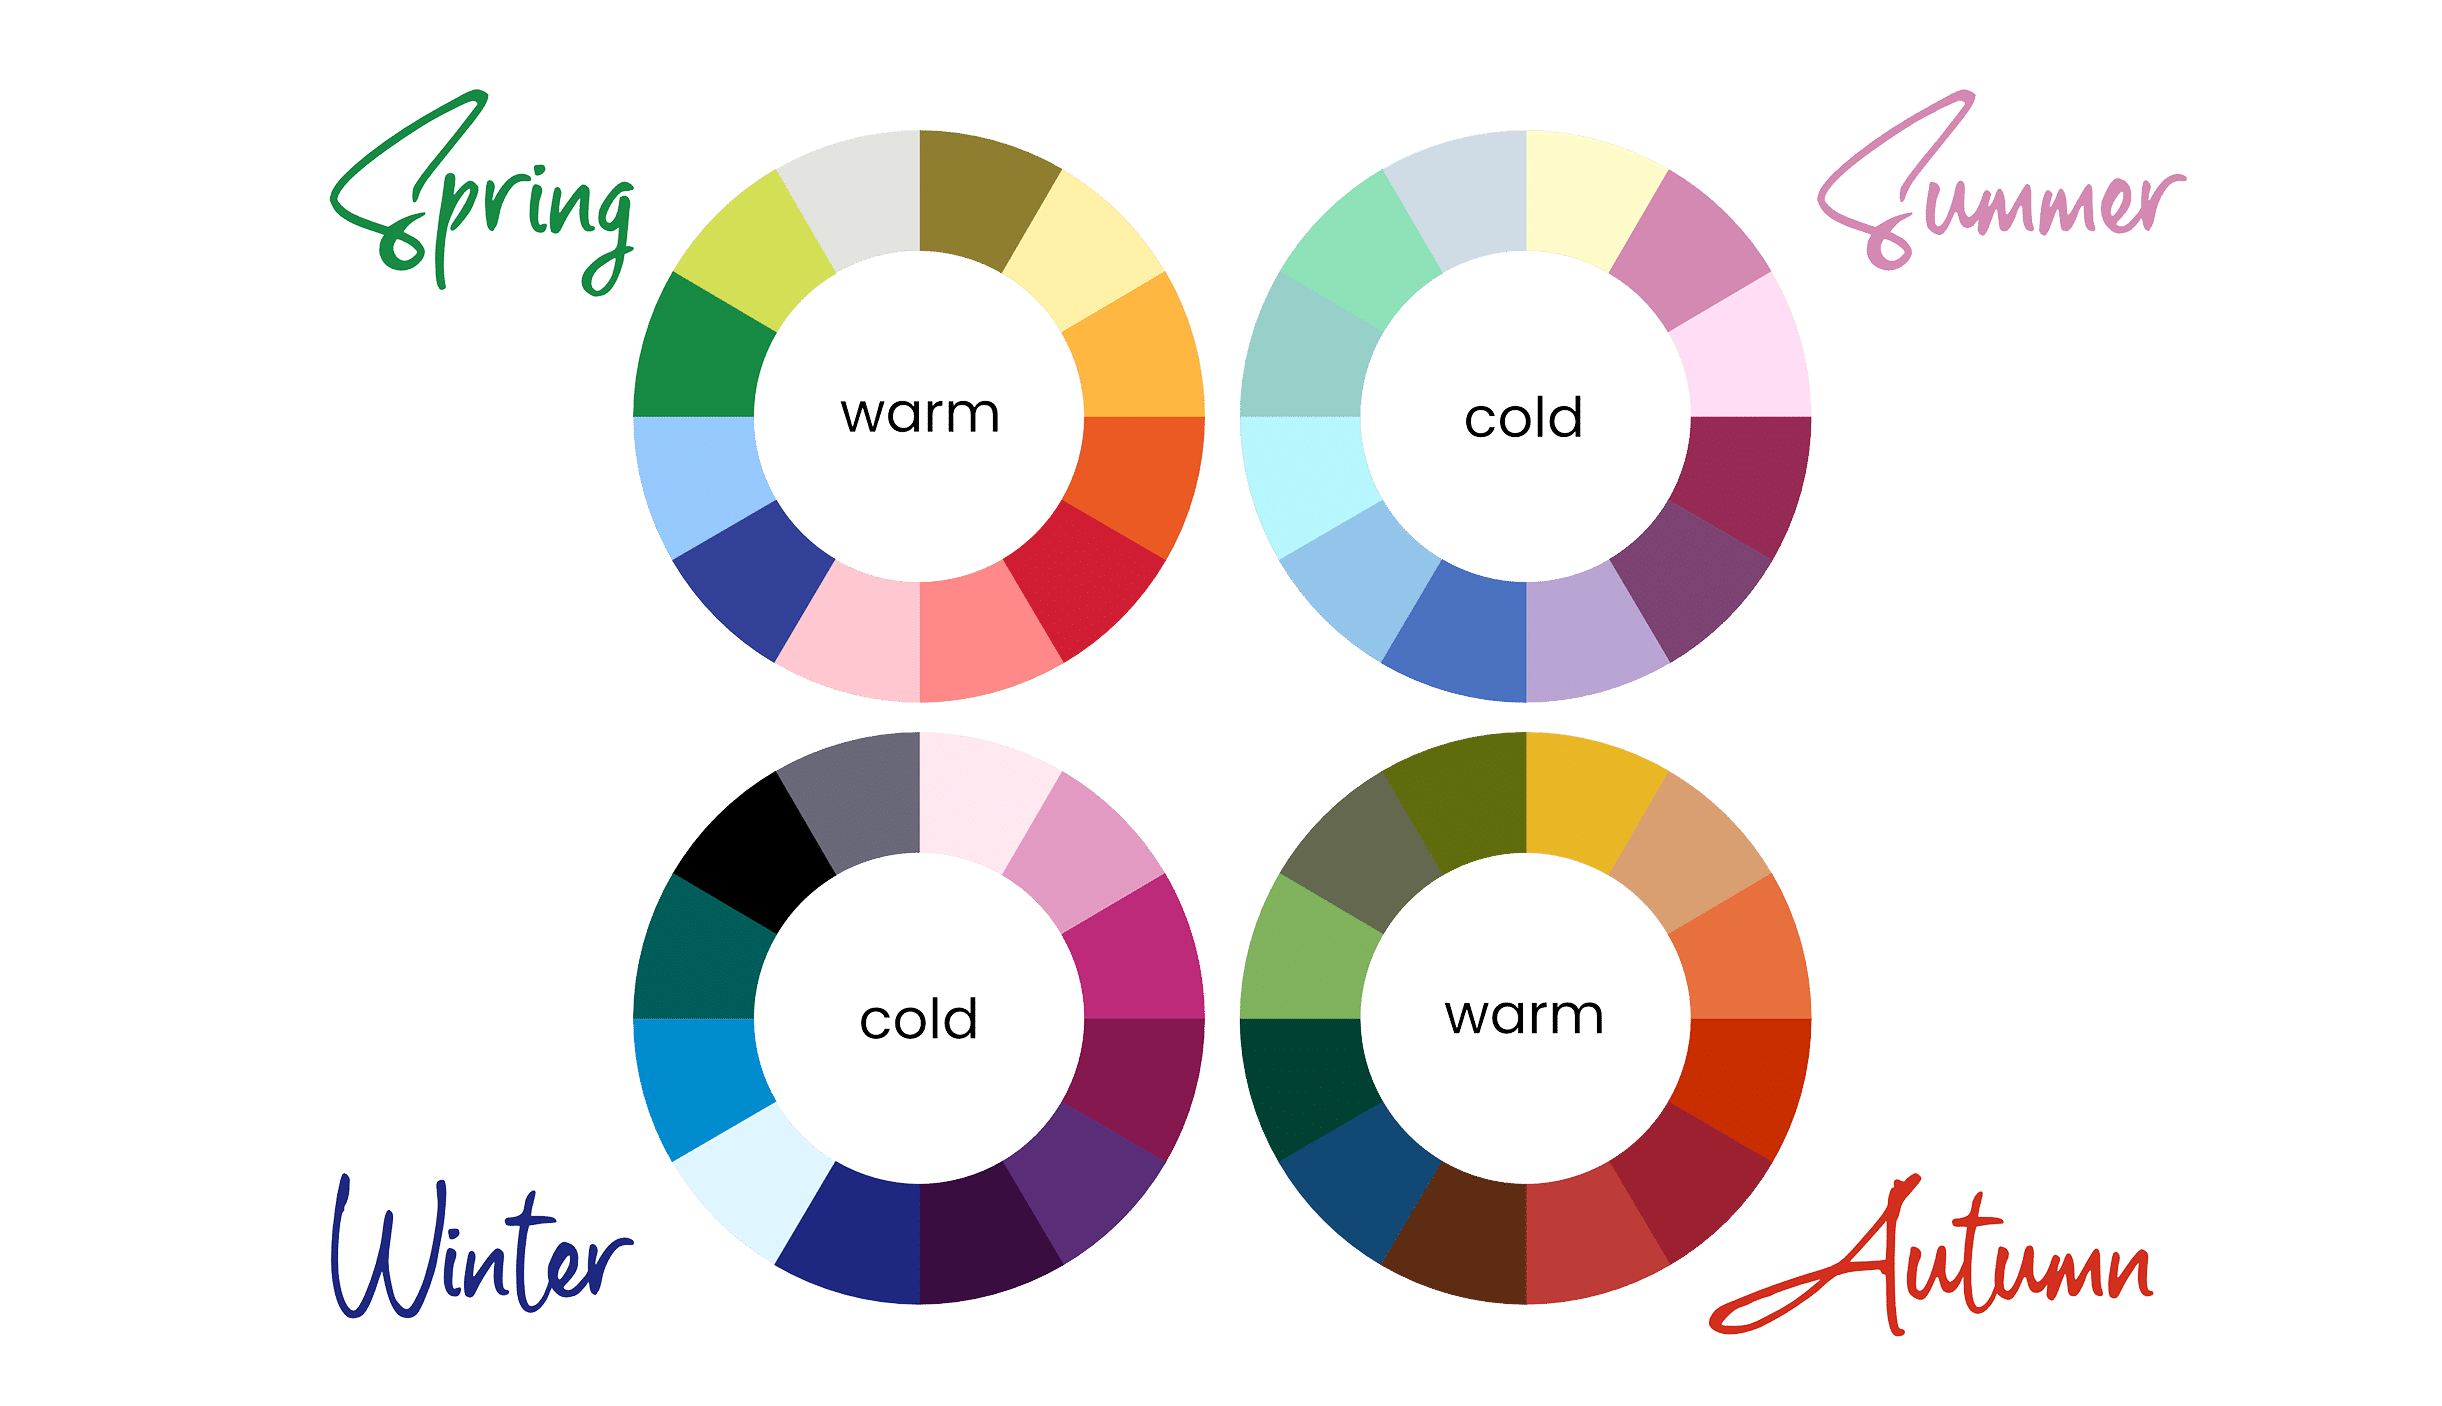 Combining colours - colour types according to seasons